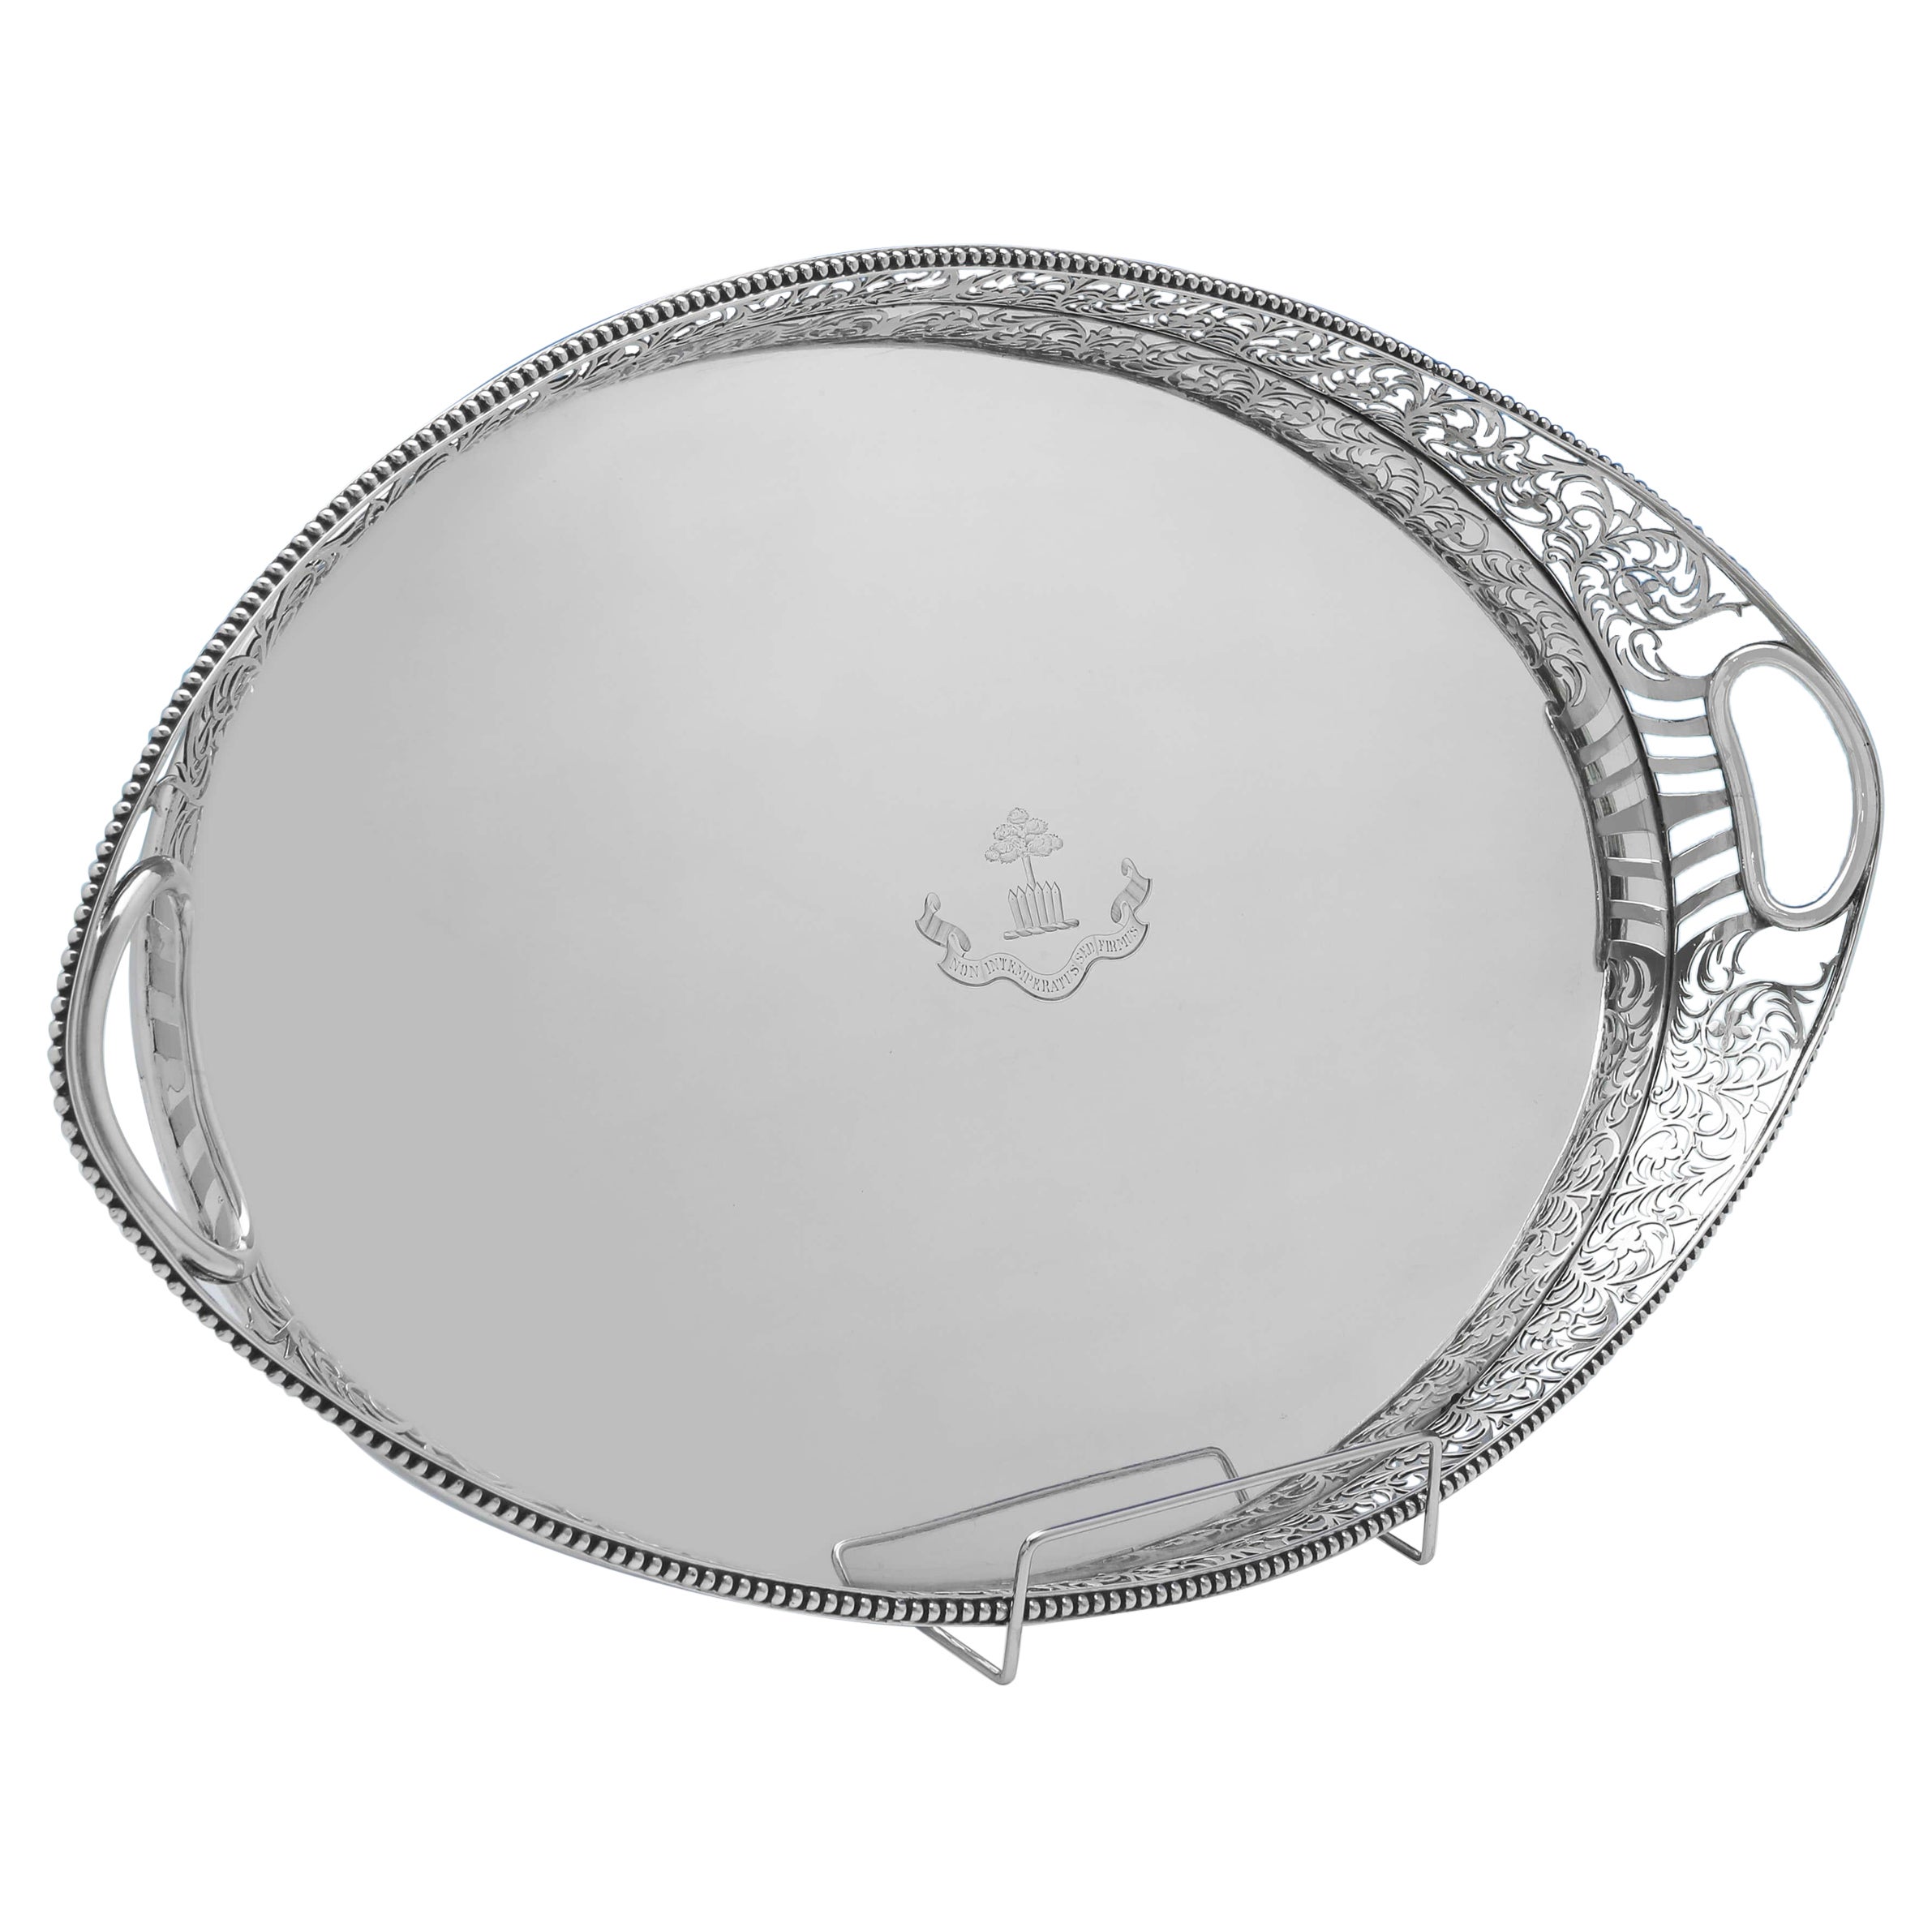 Victorian Antique Sterling Silver Gallery Tray, London 1900 by C. S. Harris For Sale